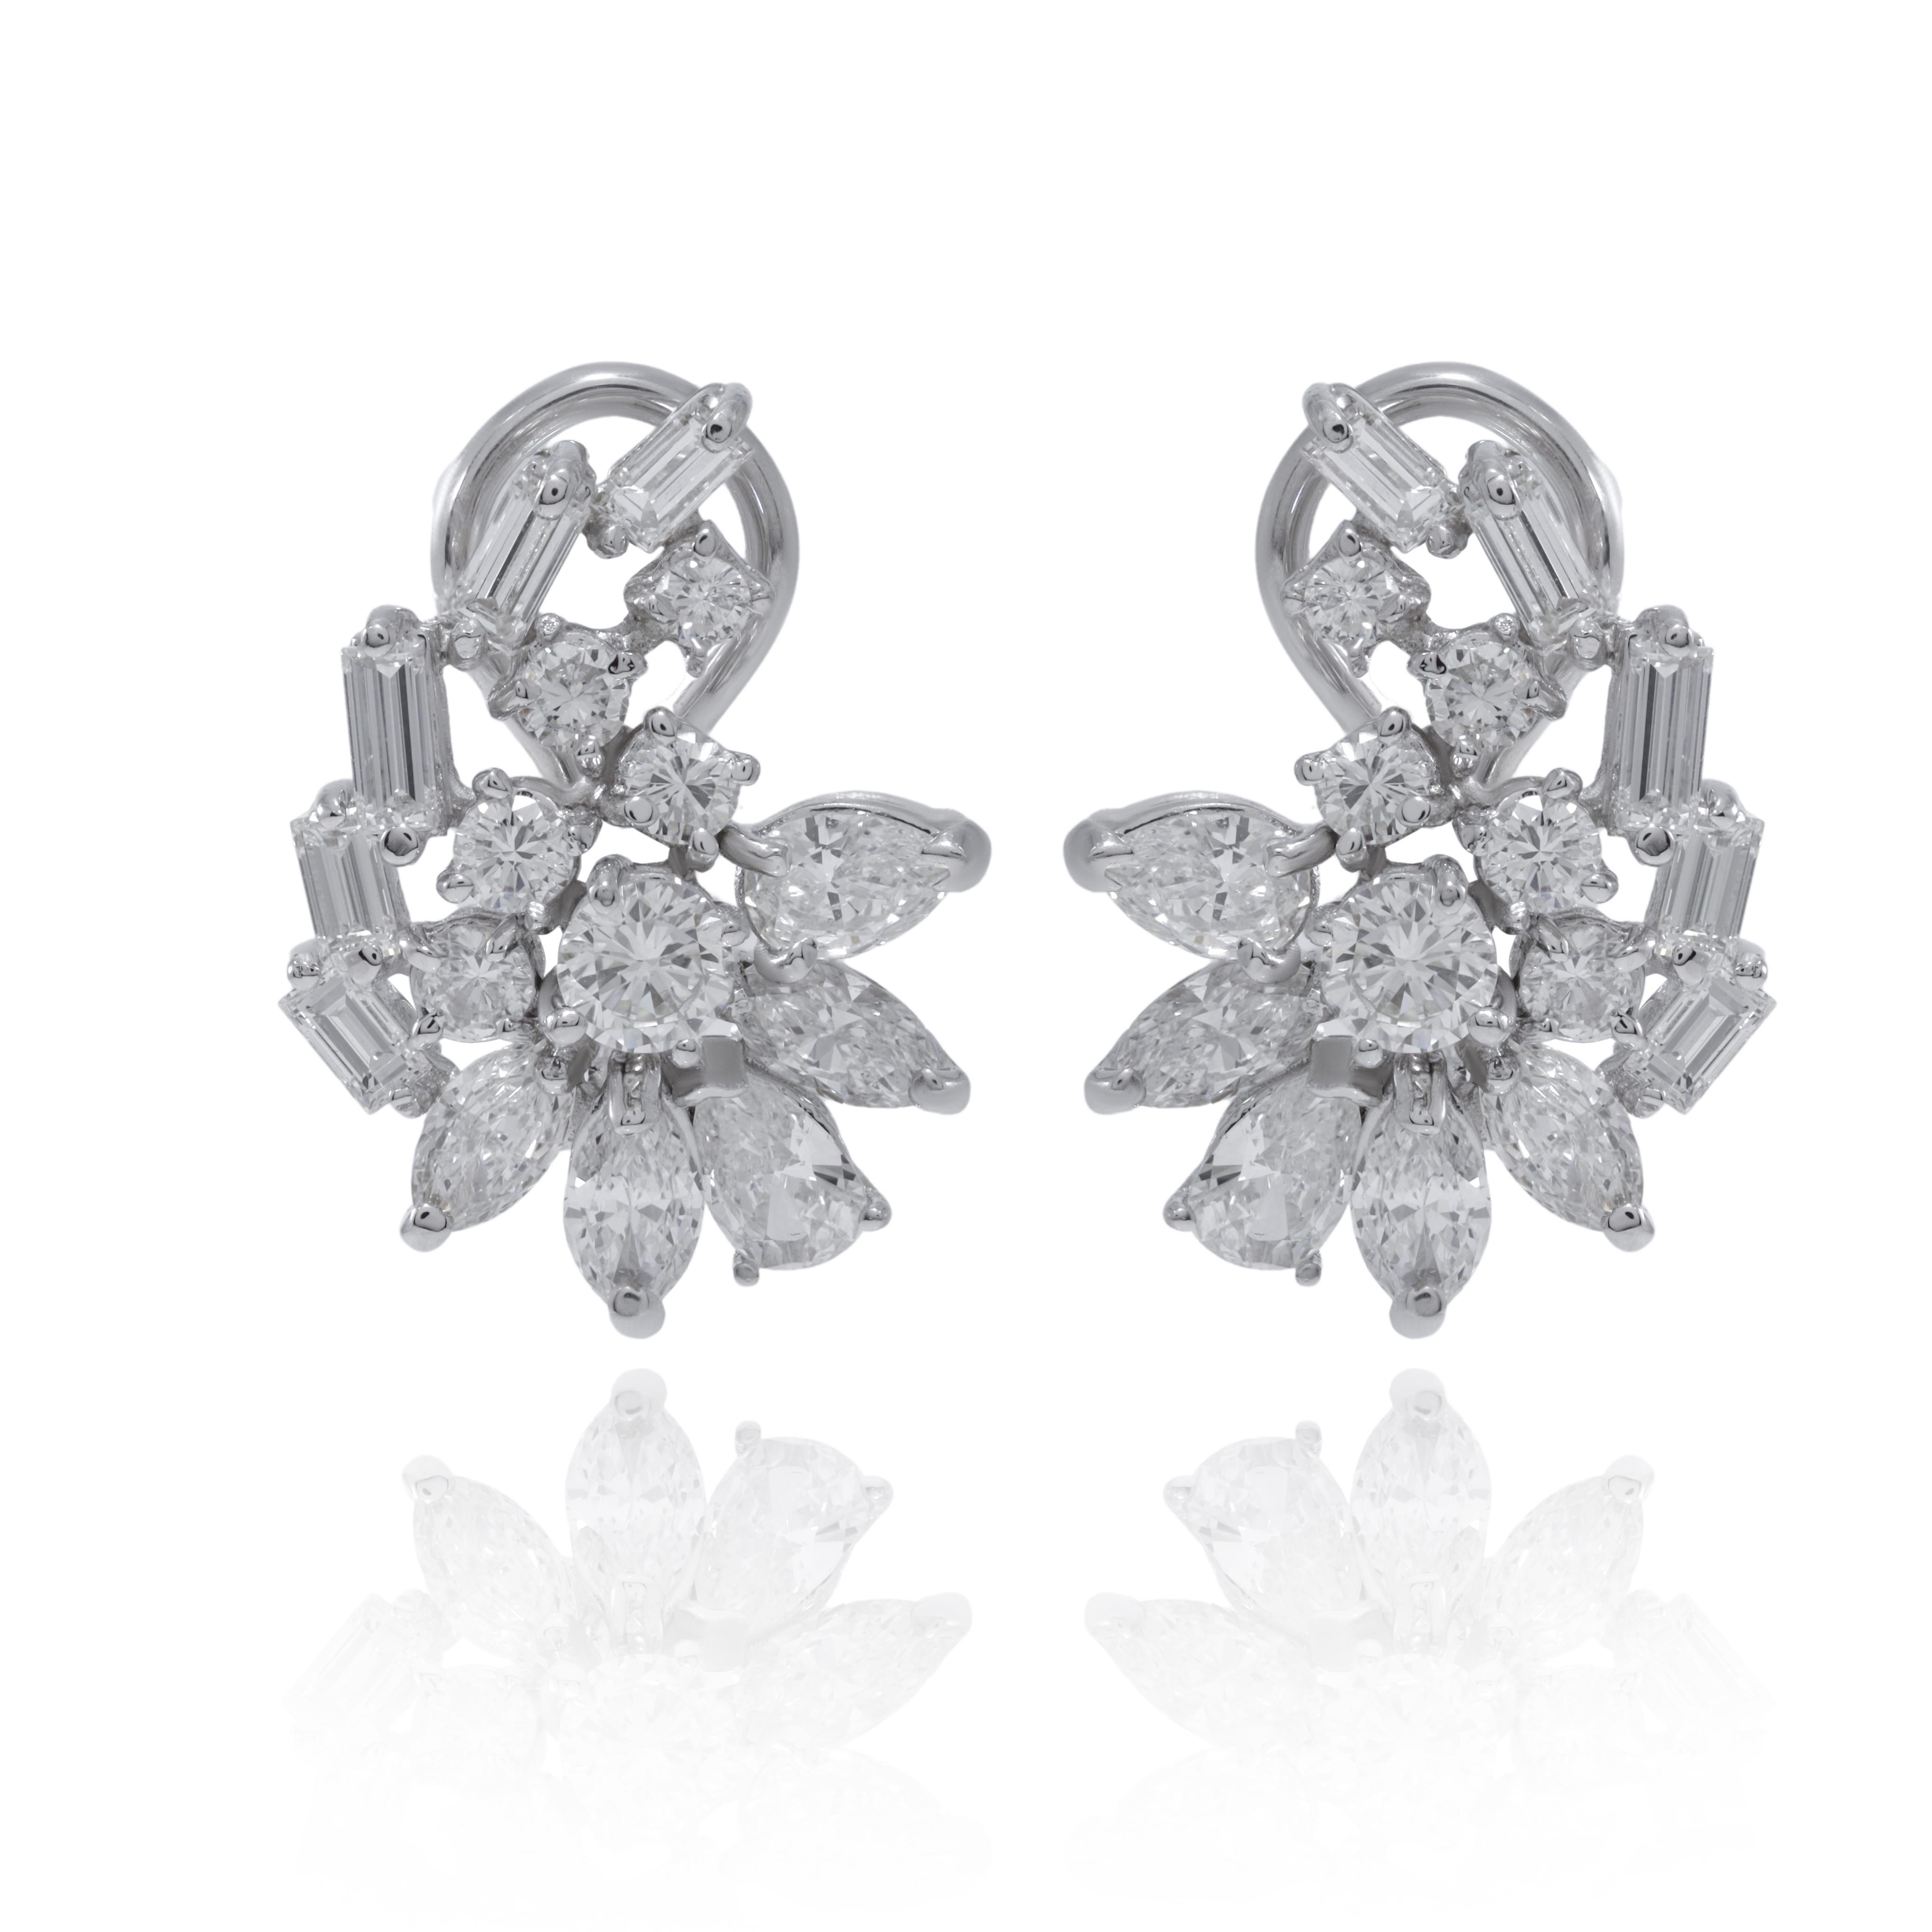 18K White Gold Diamond Earrings featuring 4.50 Carats of Diamonds

Underline your look with this sharp 18K White gold shape Diamond Earrings. High quality Diamonds. This Earrings will underline your exquisite look for any occasion.

. is a leading